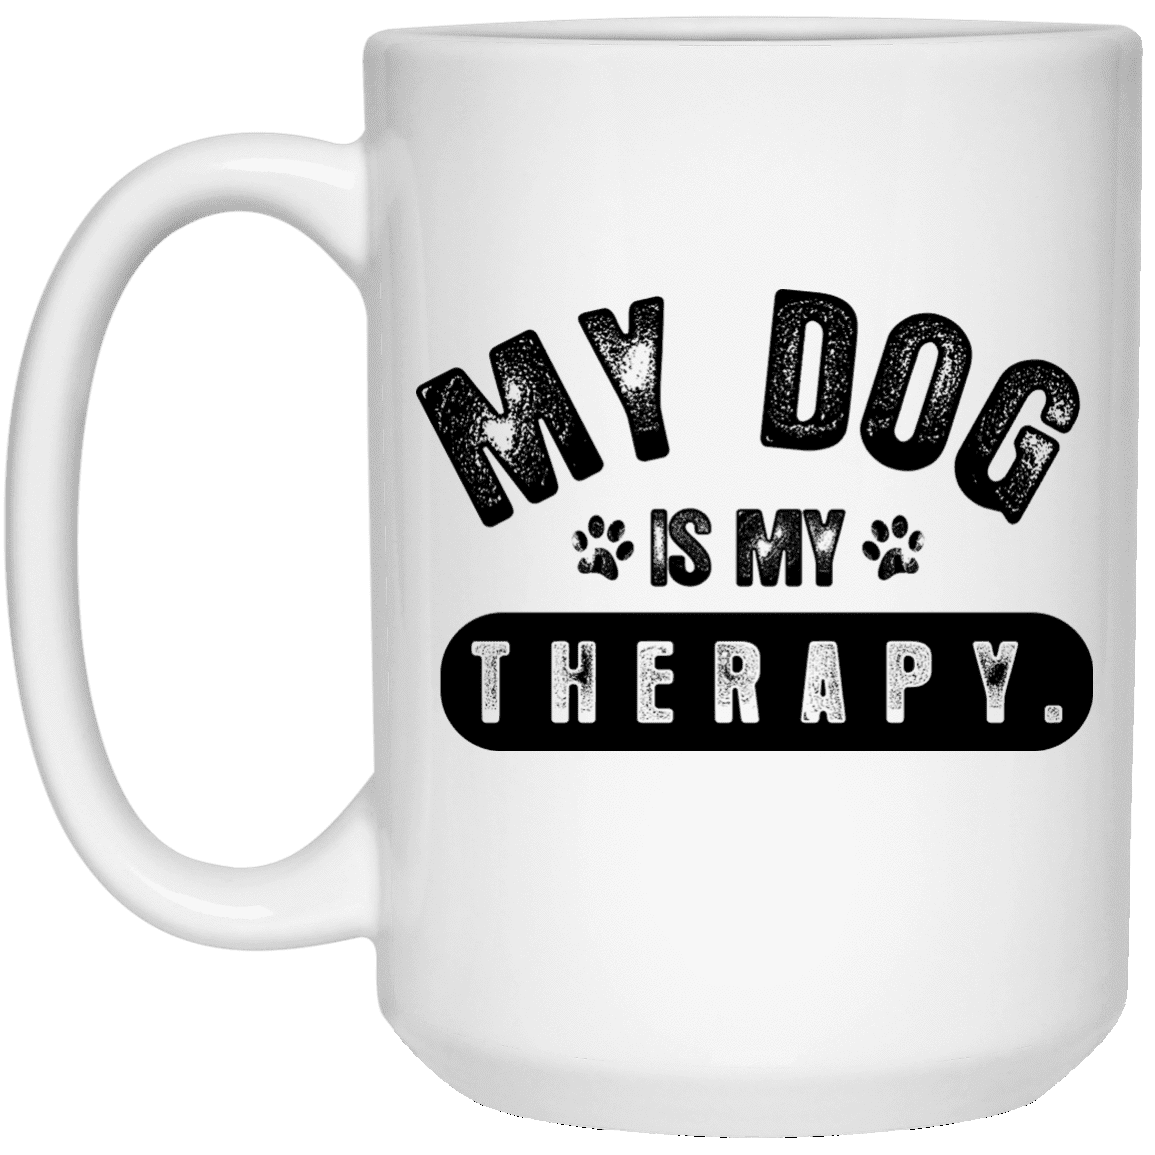 My Dog Is My Therapy - Mugs.